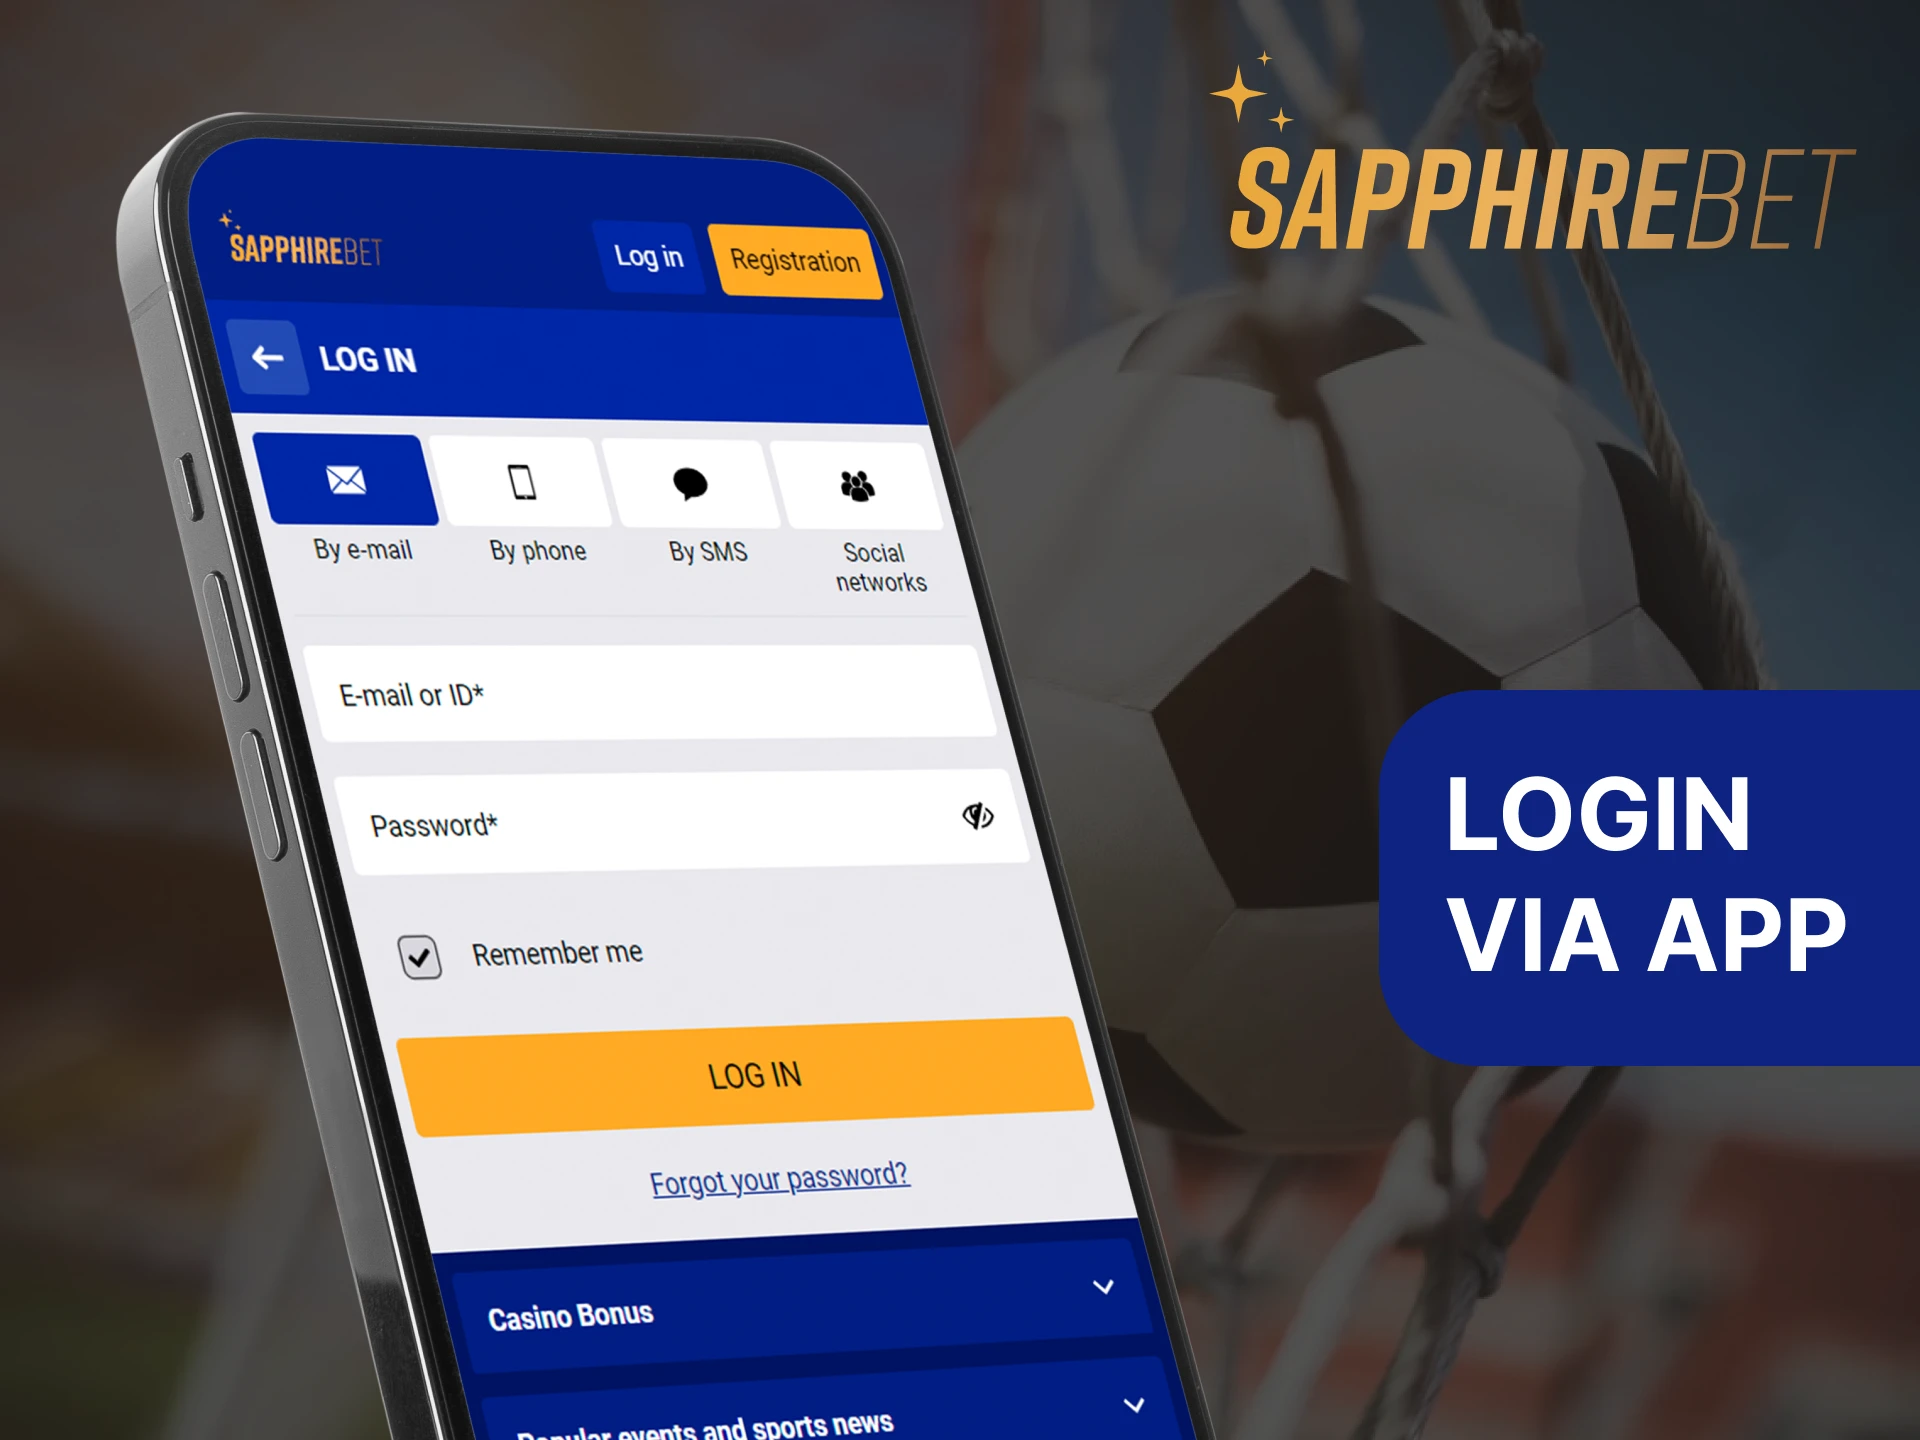 Log into your account directly in the Sapphirebet mobile app.